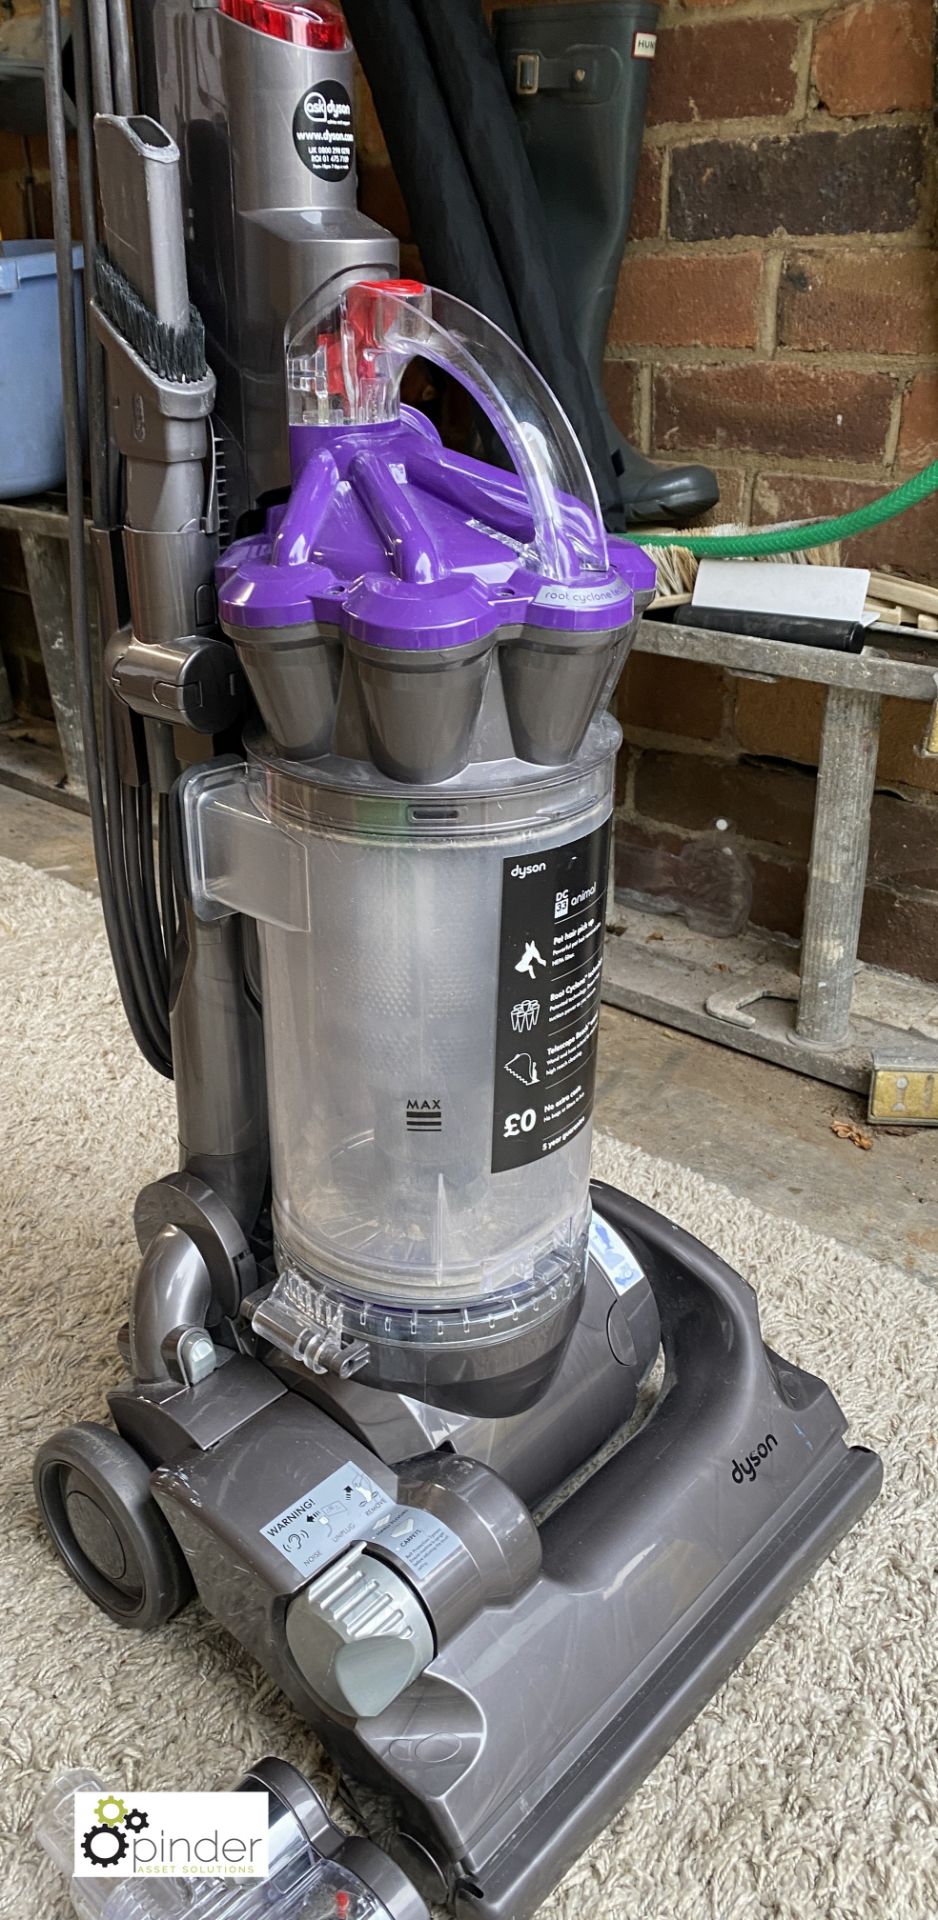 Dyson DC33 Animal Vacuum Cleaner, with pet tool - Image 4 of 6